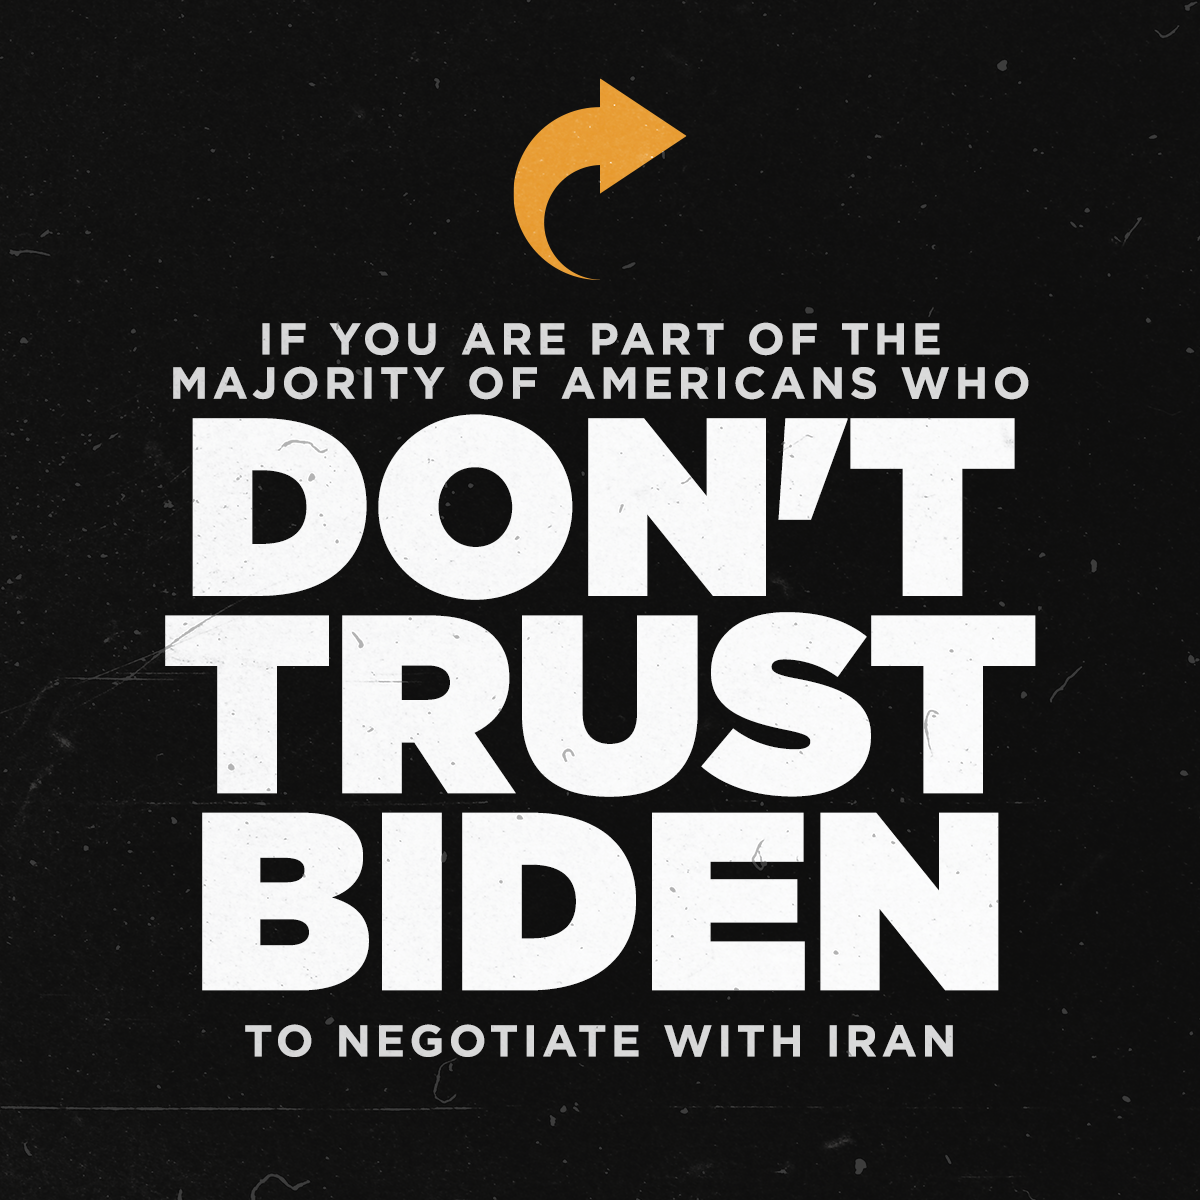 Share if you are part of the majority of Americans who don't trust Biden to negotiate with Iran.